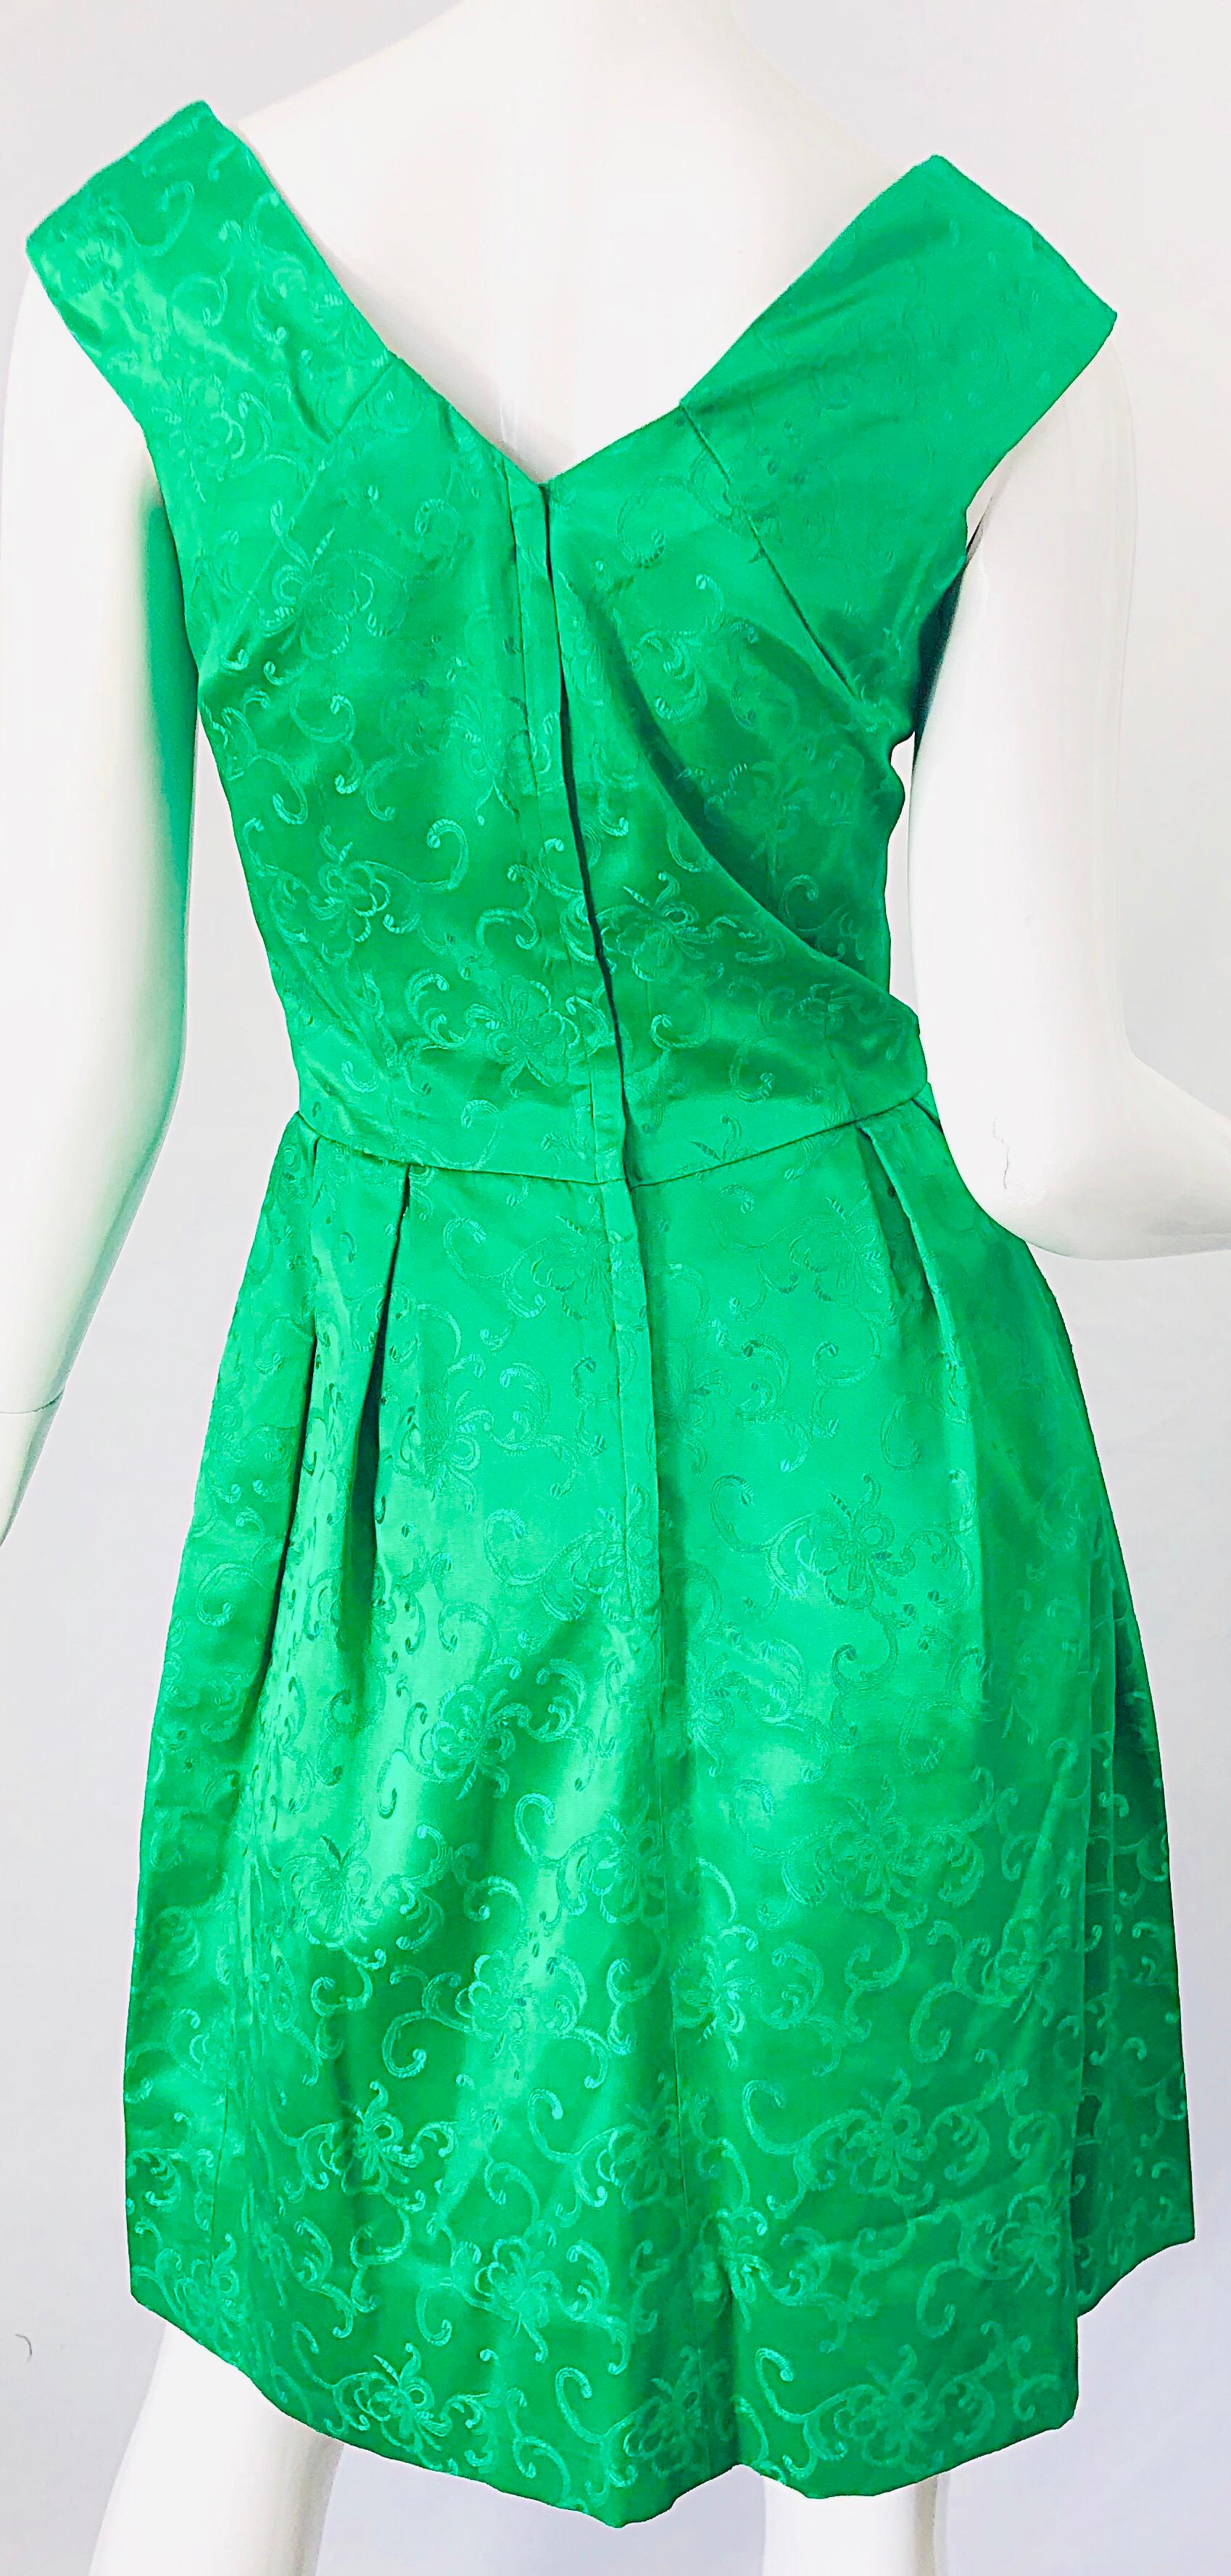 Chic 1960s Kelly Green Silk Damask Sleeveless Vintage 60s A-Line Dress For Sale 5